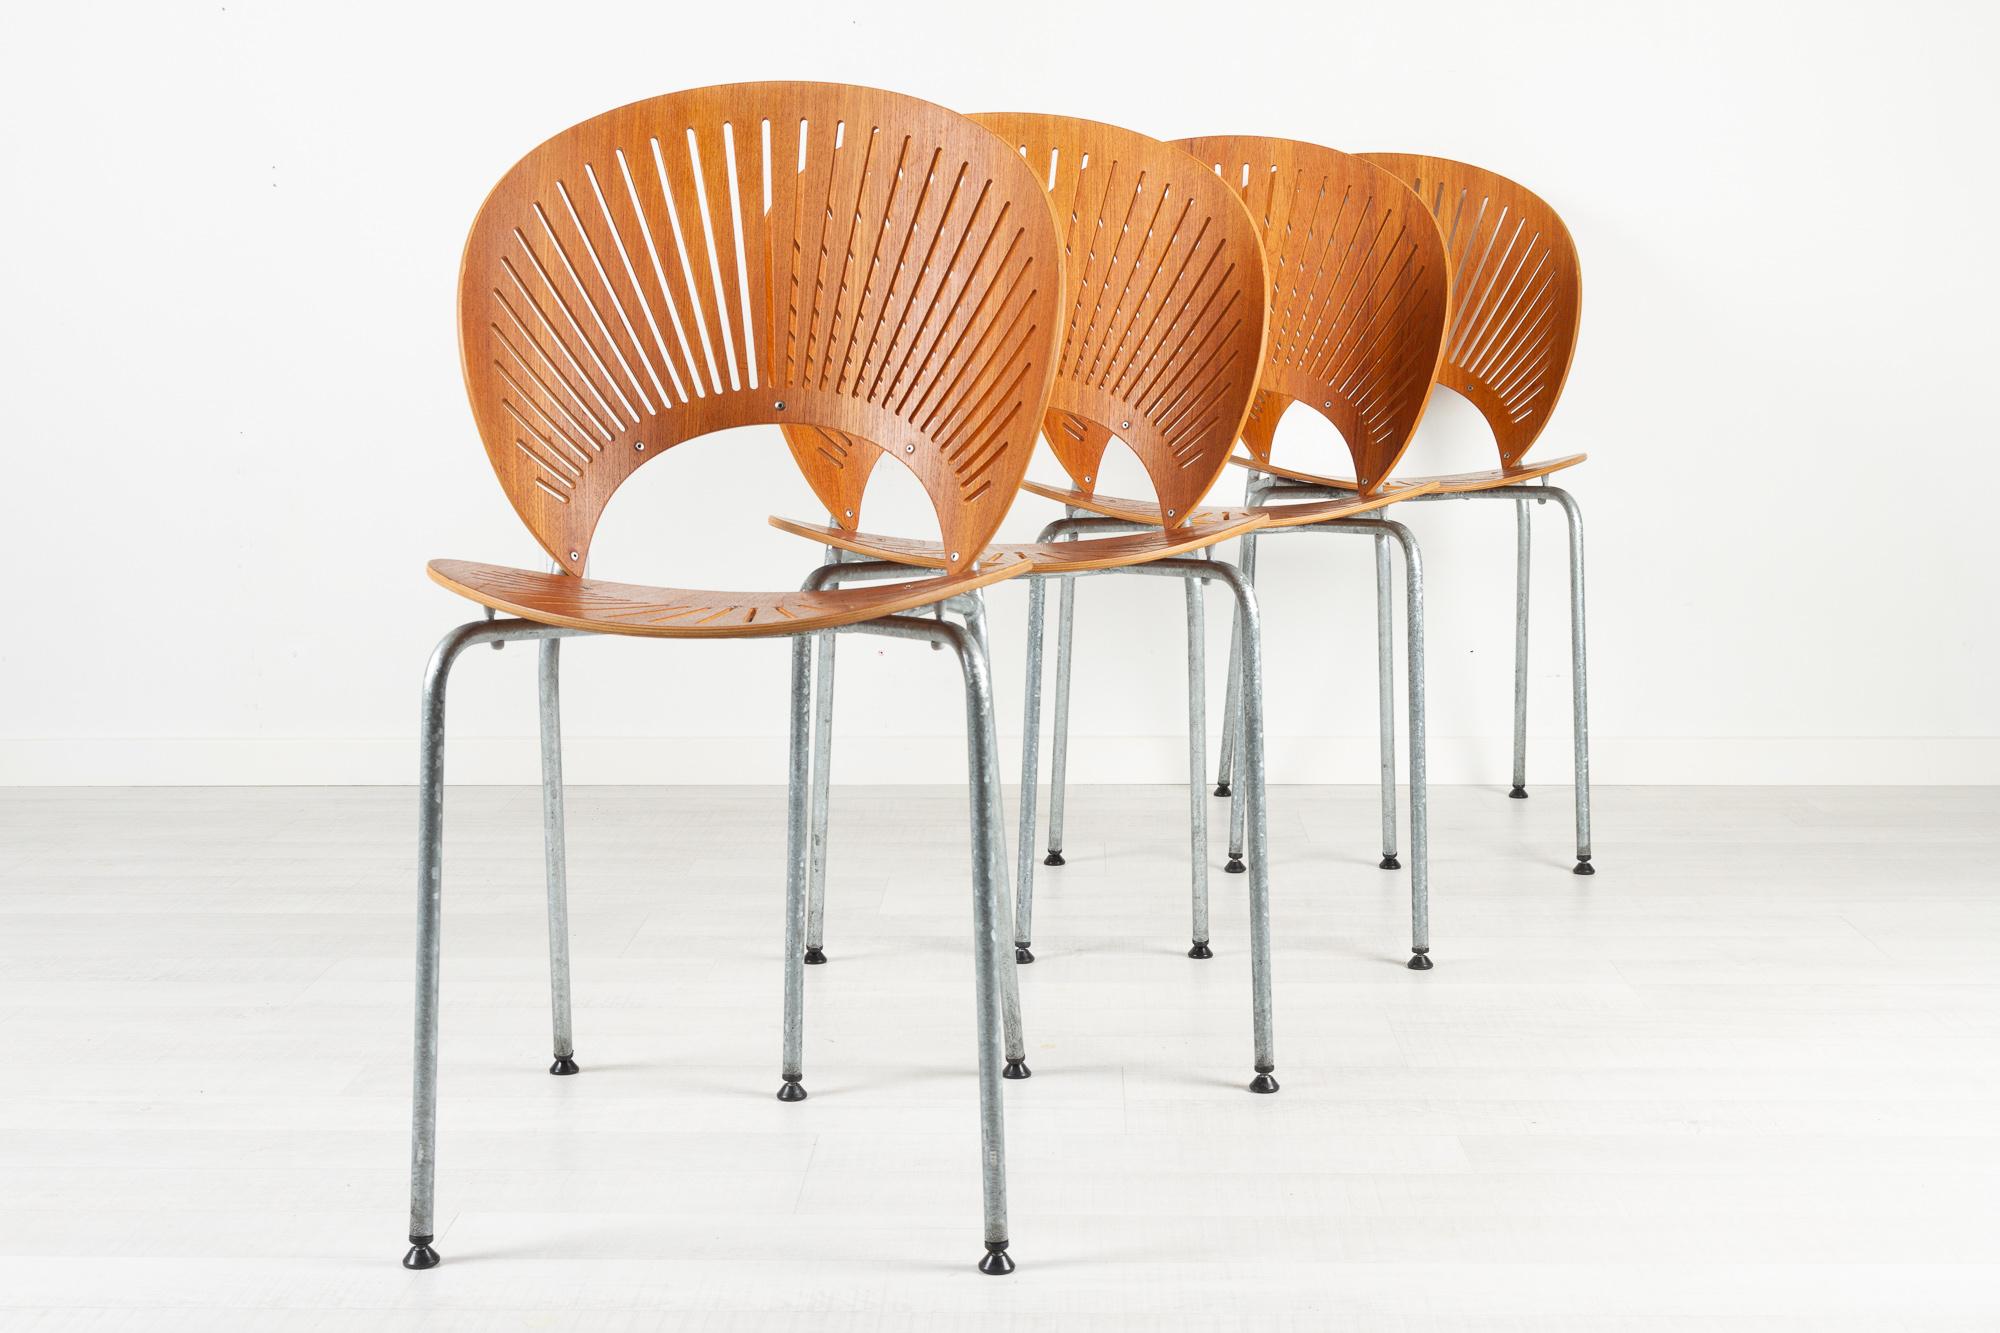 Trinidad teak dining chairs by Nanna Ditzel for Fredericia Stolefabrik Denmark 1990s

When designing the Trinidad Chair Model 3298 in 1993, Danish designer Nanna Ditzel found inspiration in the elaborate fretwork from the Gingerbread Facades that